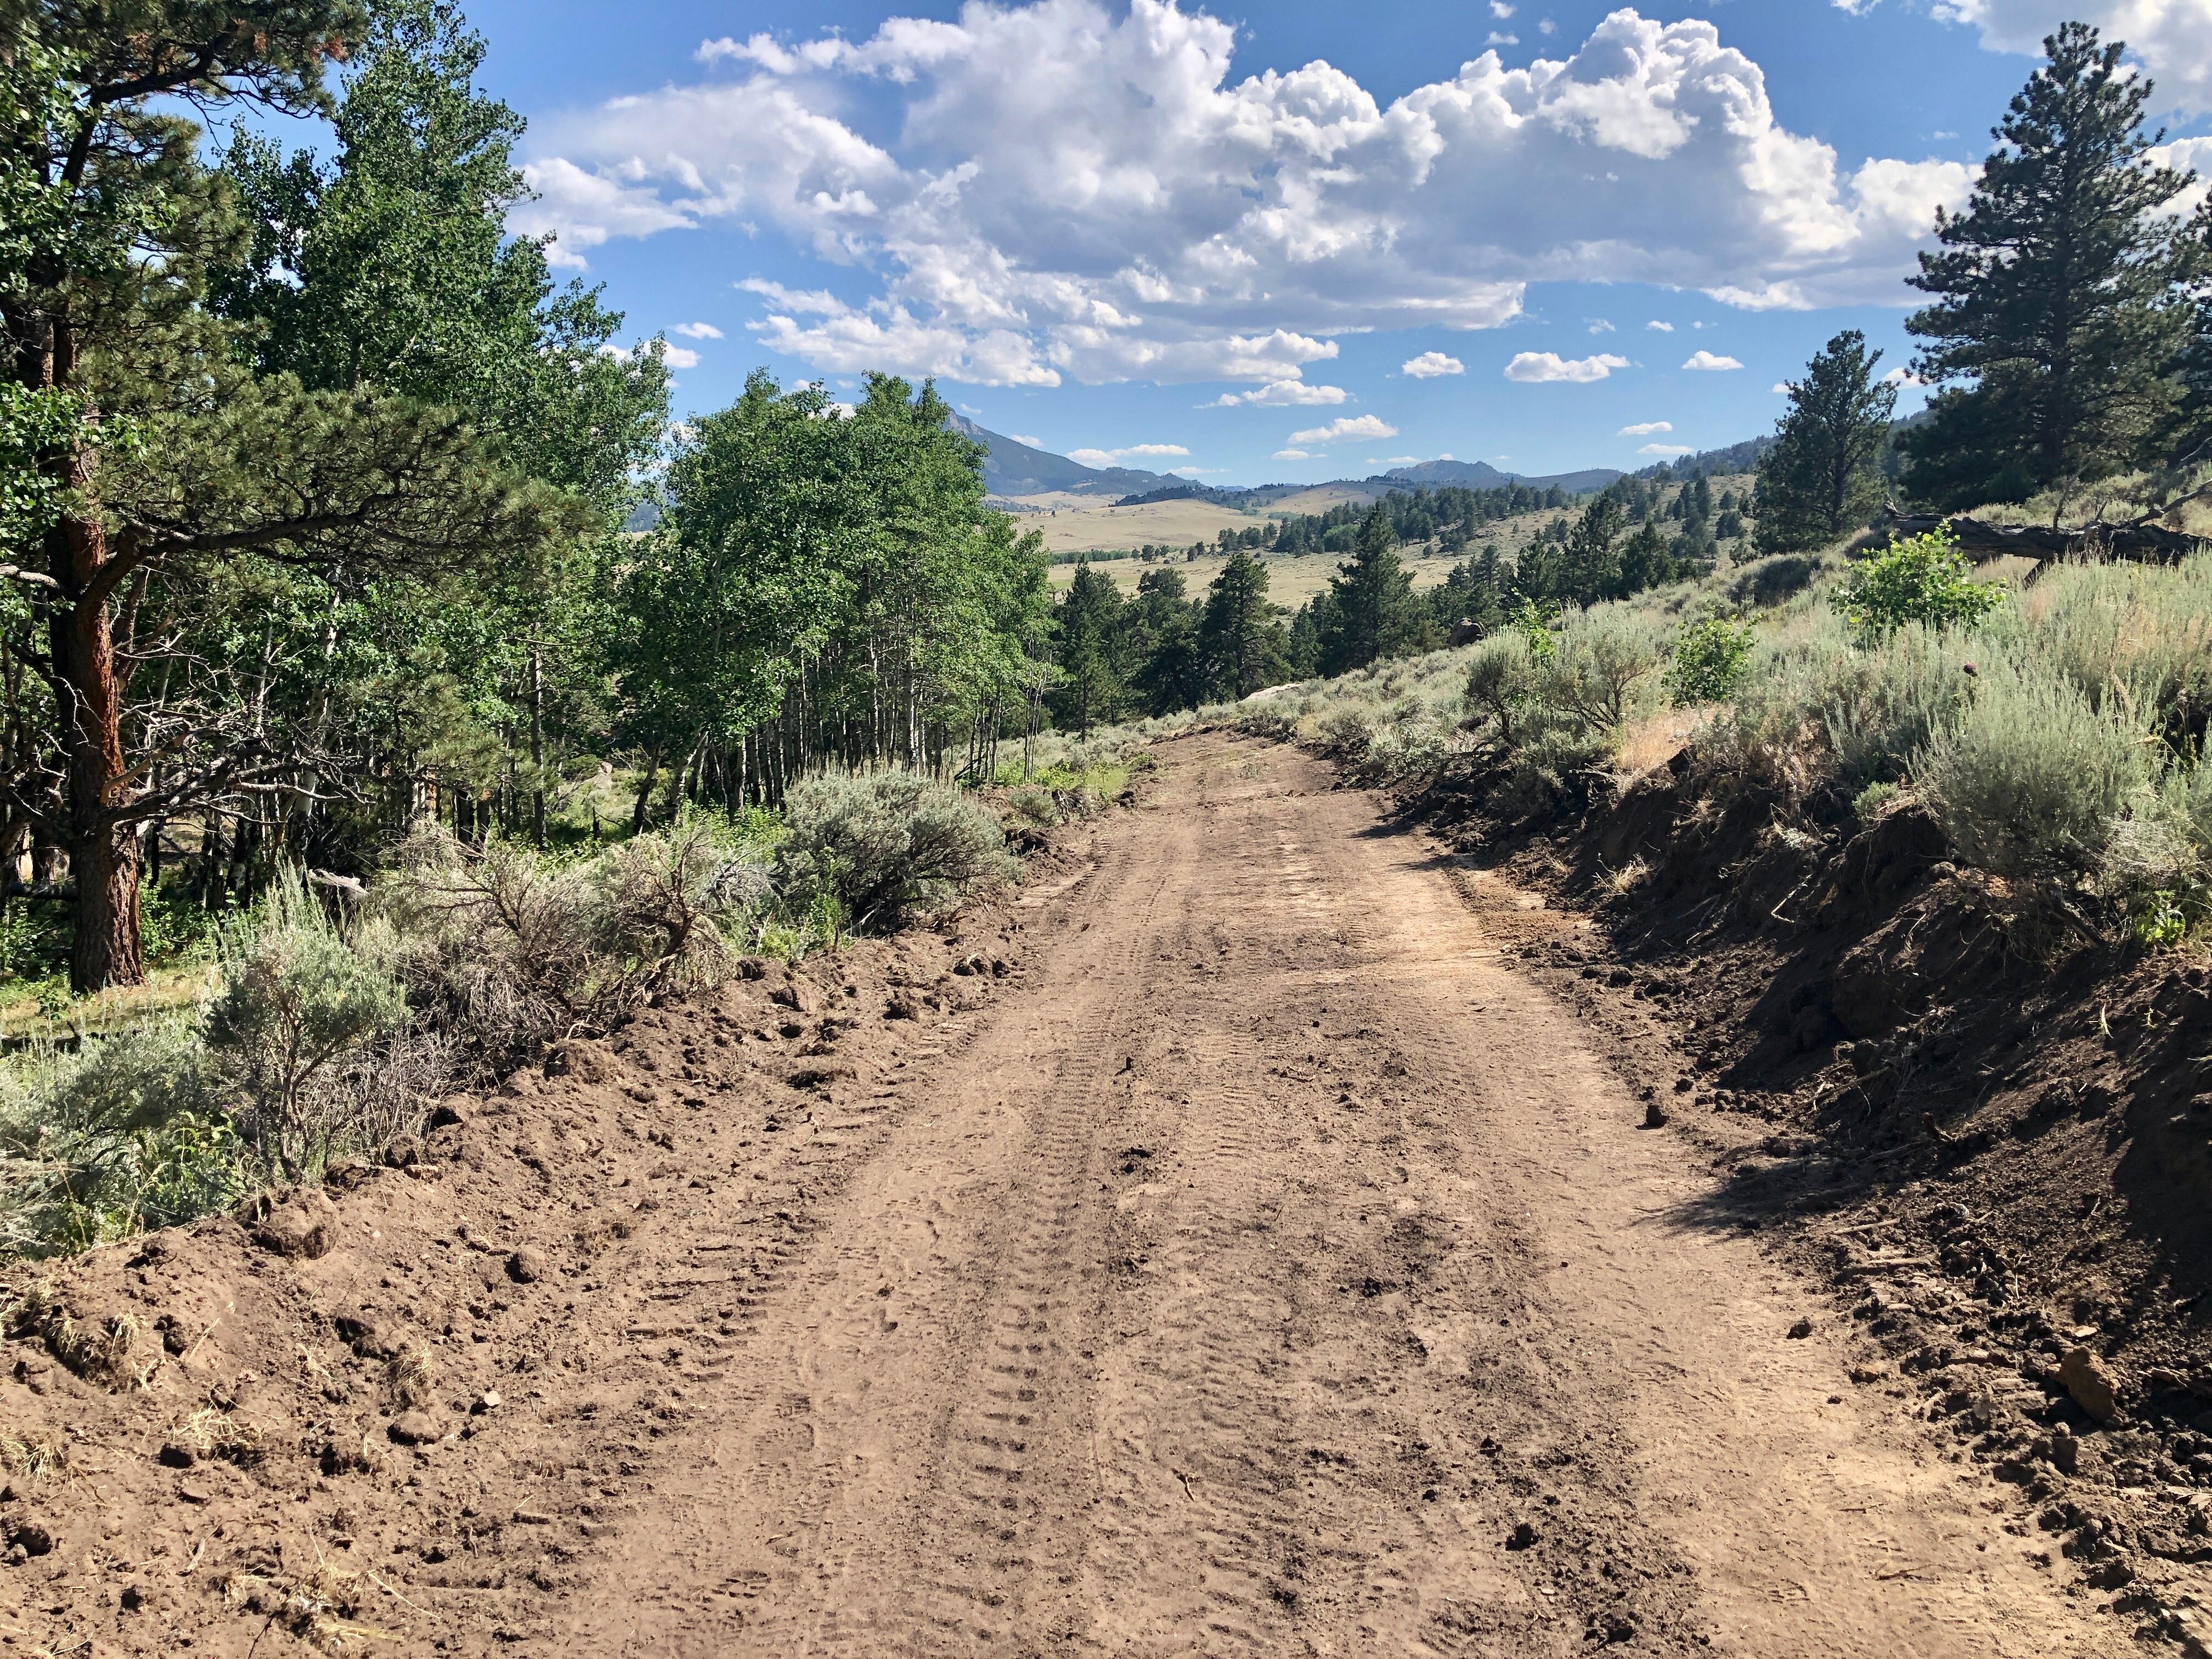 Dozer line cuts through thick vegetation leaving an eight foot wide tract of bare soil. On the left of the dozer line is thick pine and aspen forest and sage. On the right is thick sage brush. The background contains the Laramie Mountains.